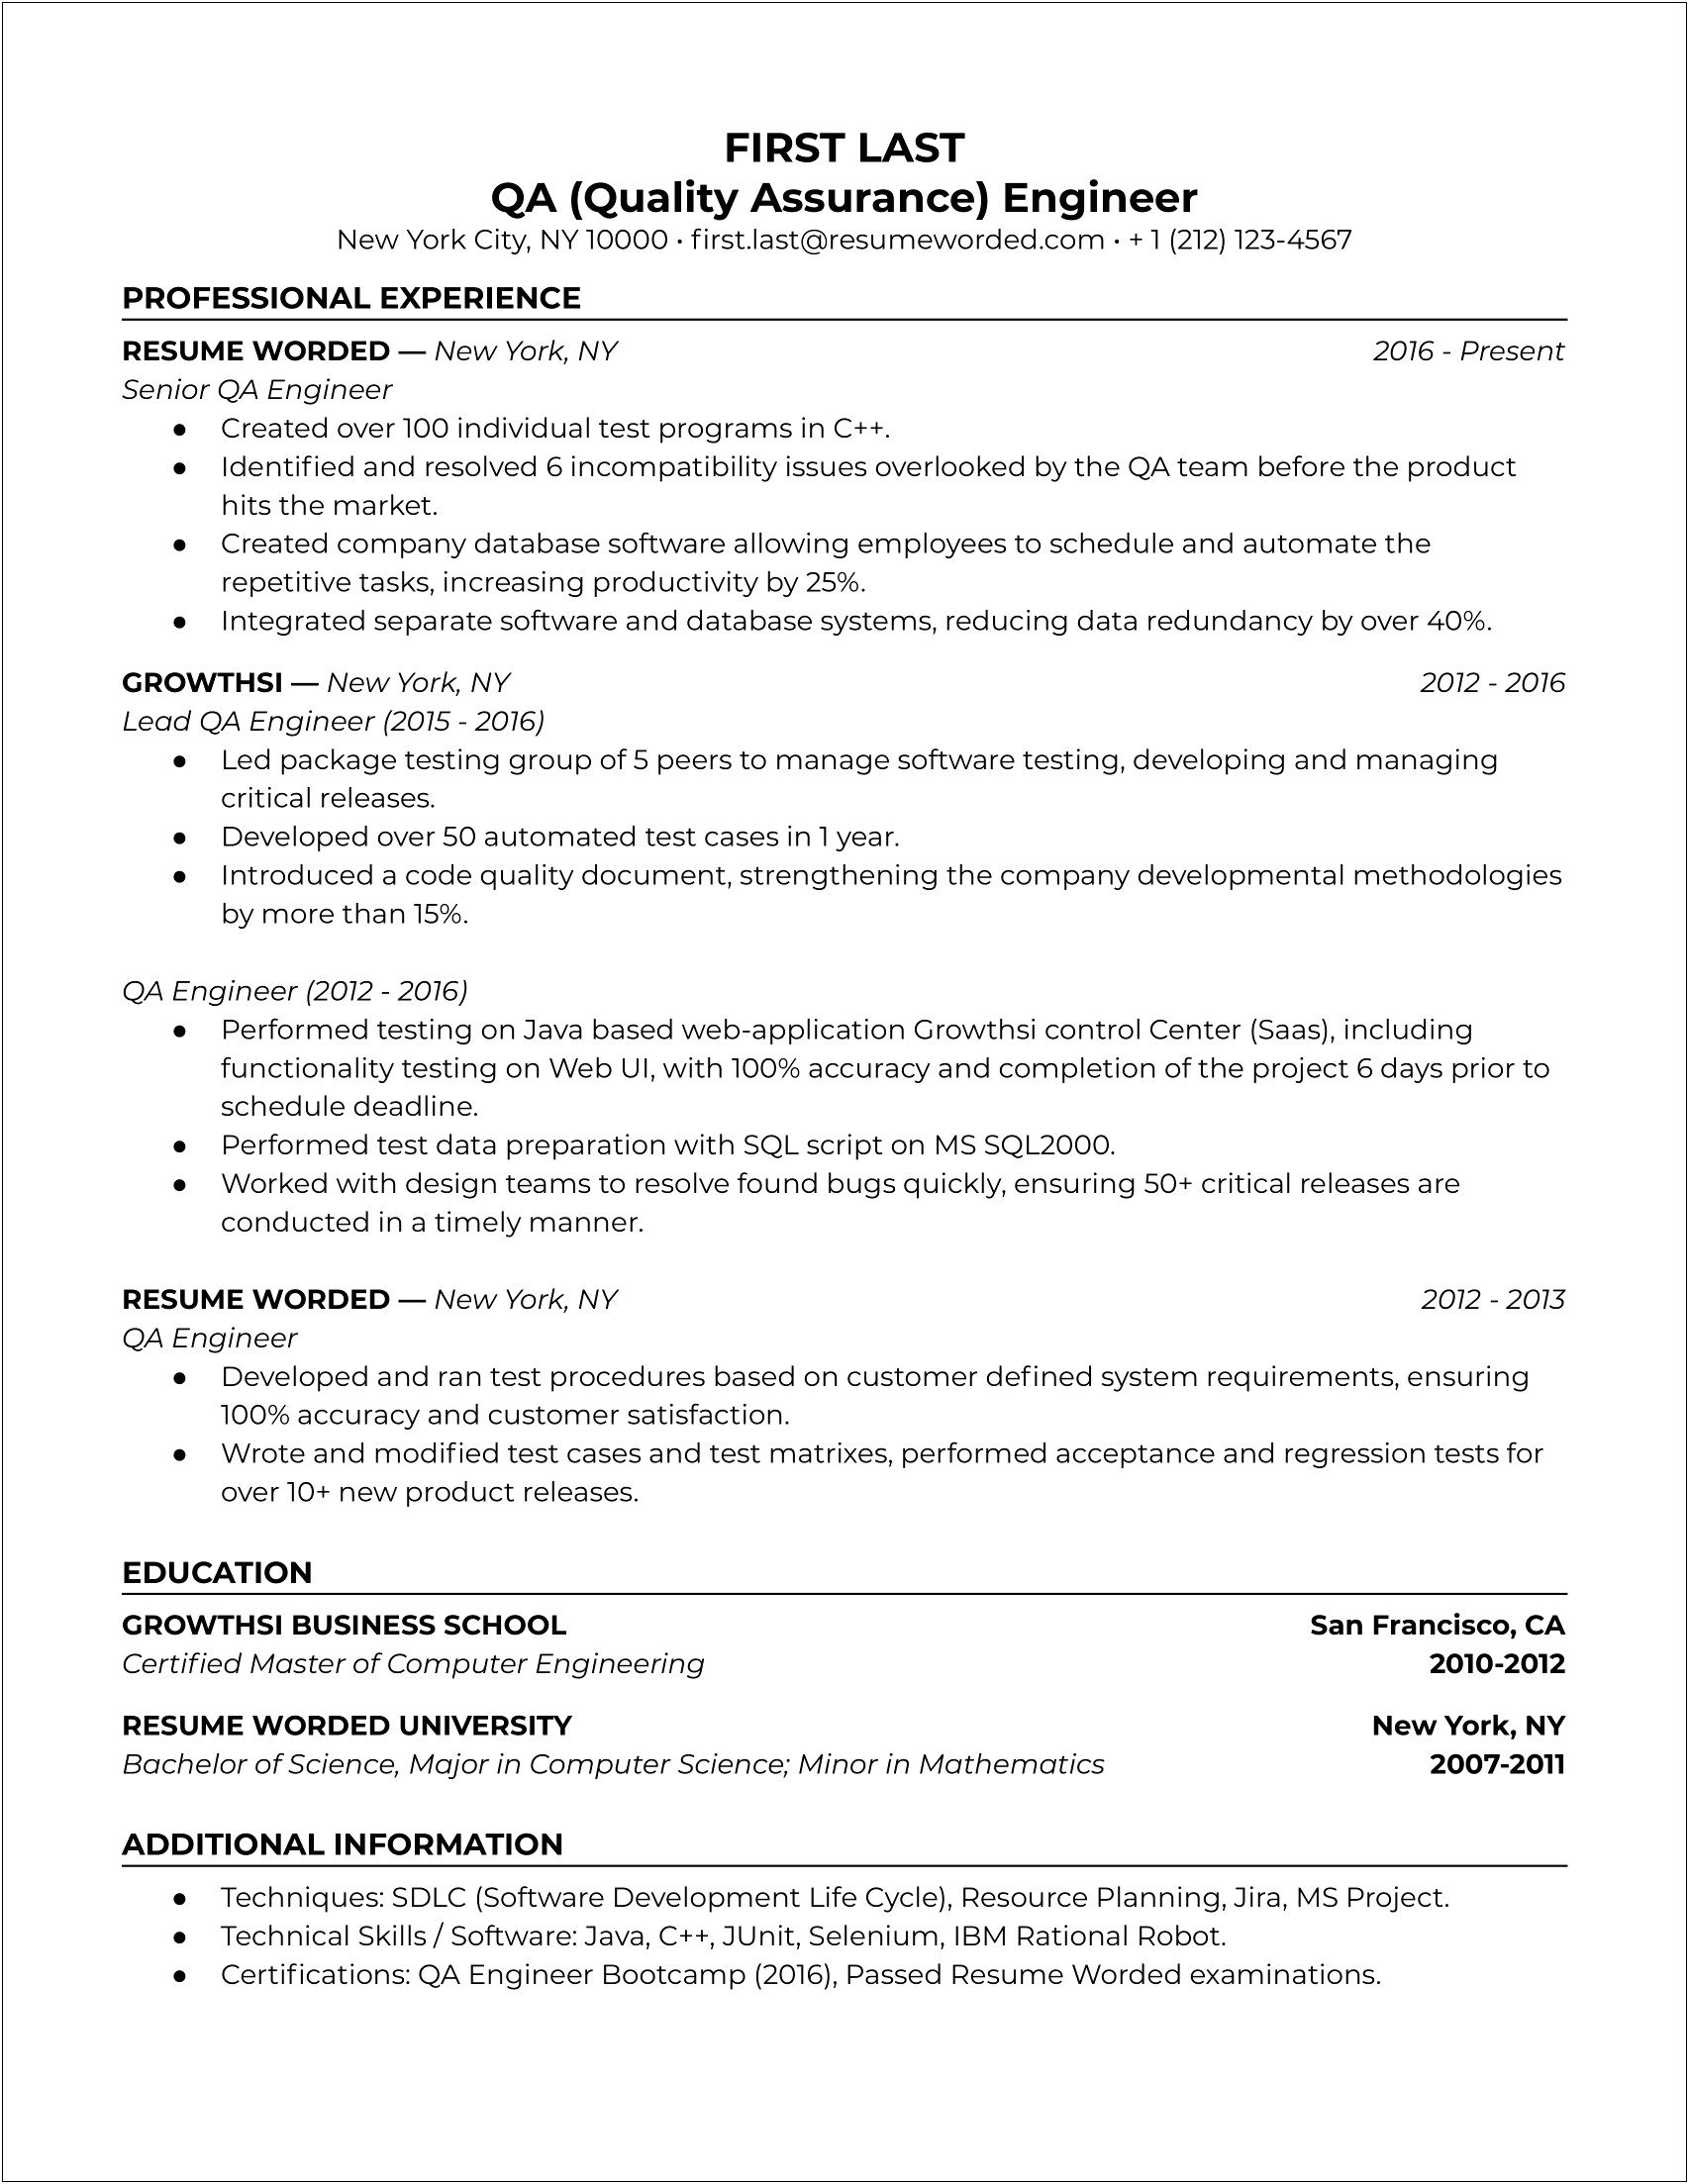 Qa Tester Resume With Web Services Experience